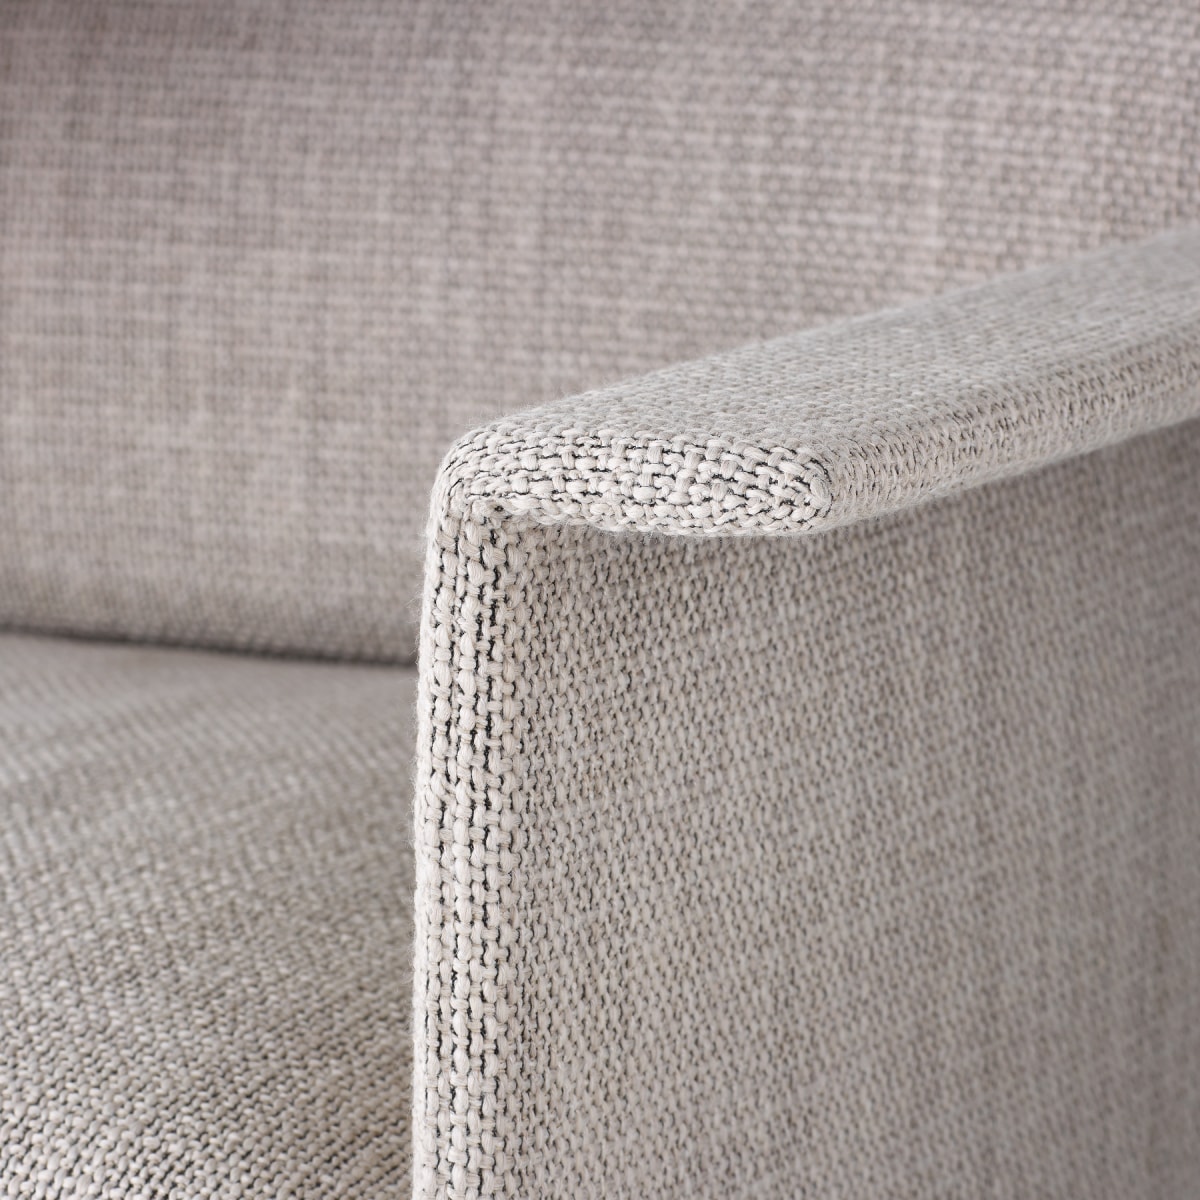 A detailed view of a Mantle Club Chair arm upholstered in Capri Stone.